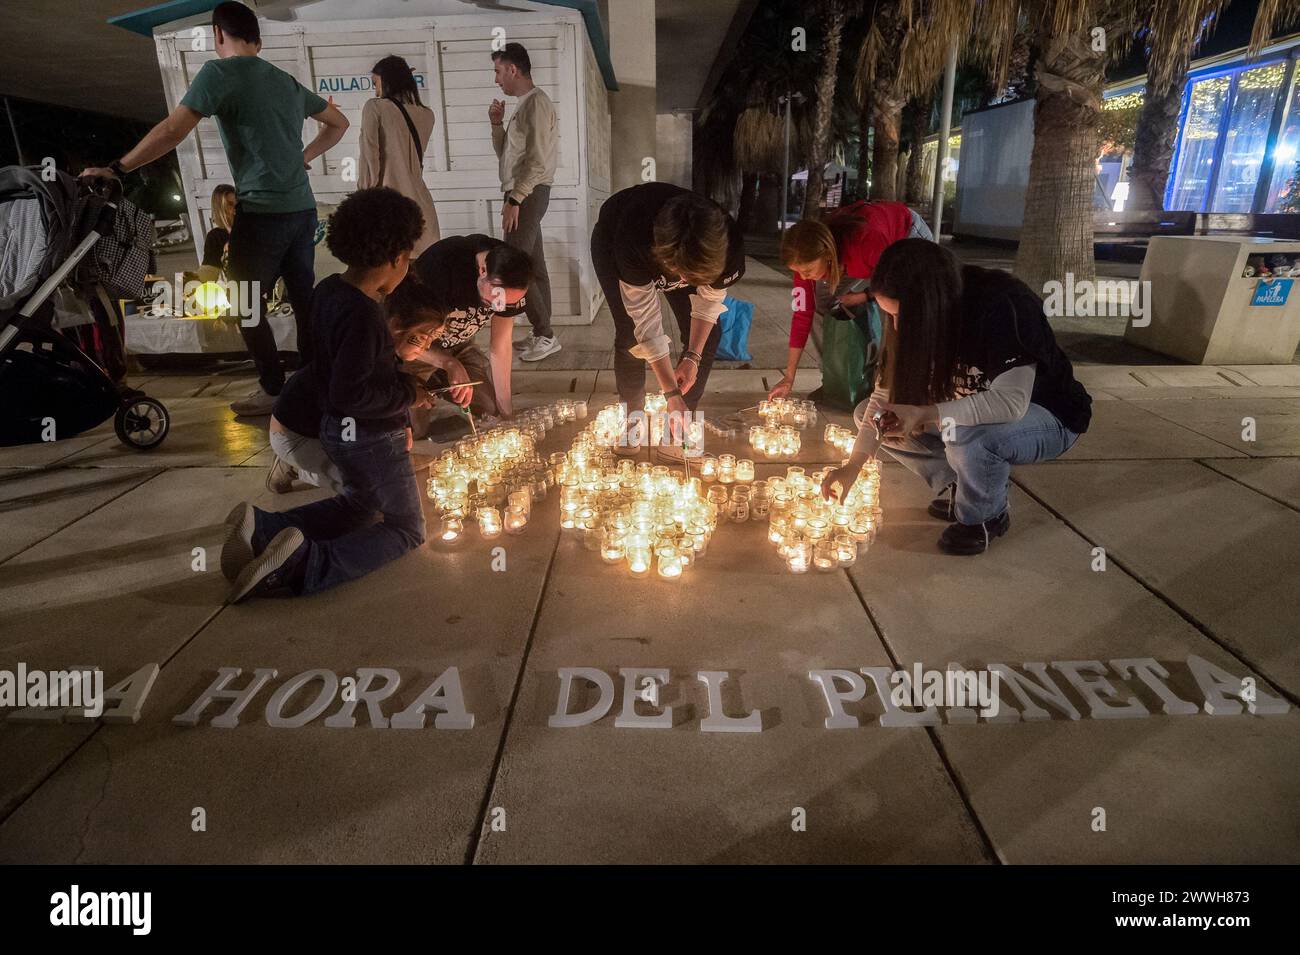 Members of the World Wildlife Foundation (WWF) are seen lighting candles of a mosaic that depicts a panda, the symbol of WWF, during the Earth Hour in the centre of Malaga. The figure made with candles is a panda, the symbol of the WWF. Thousands of cities around the world switched off their electric lights during the Earth Hour to highlight the dangers of climate change. The figure made with candles is a panda, the symbol of the WWF. Thousands of cities worldwide switched off their electric lights during Earth Hour to highlight the dangers of climate change. (Photo by Jesus Merida/SOPA Imag Stock Photo